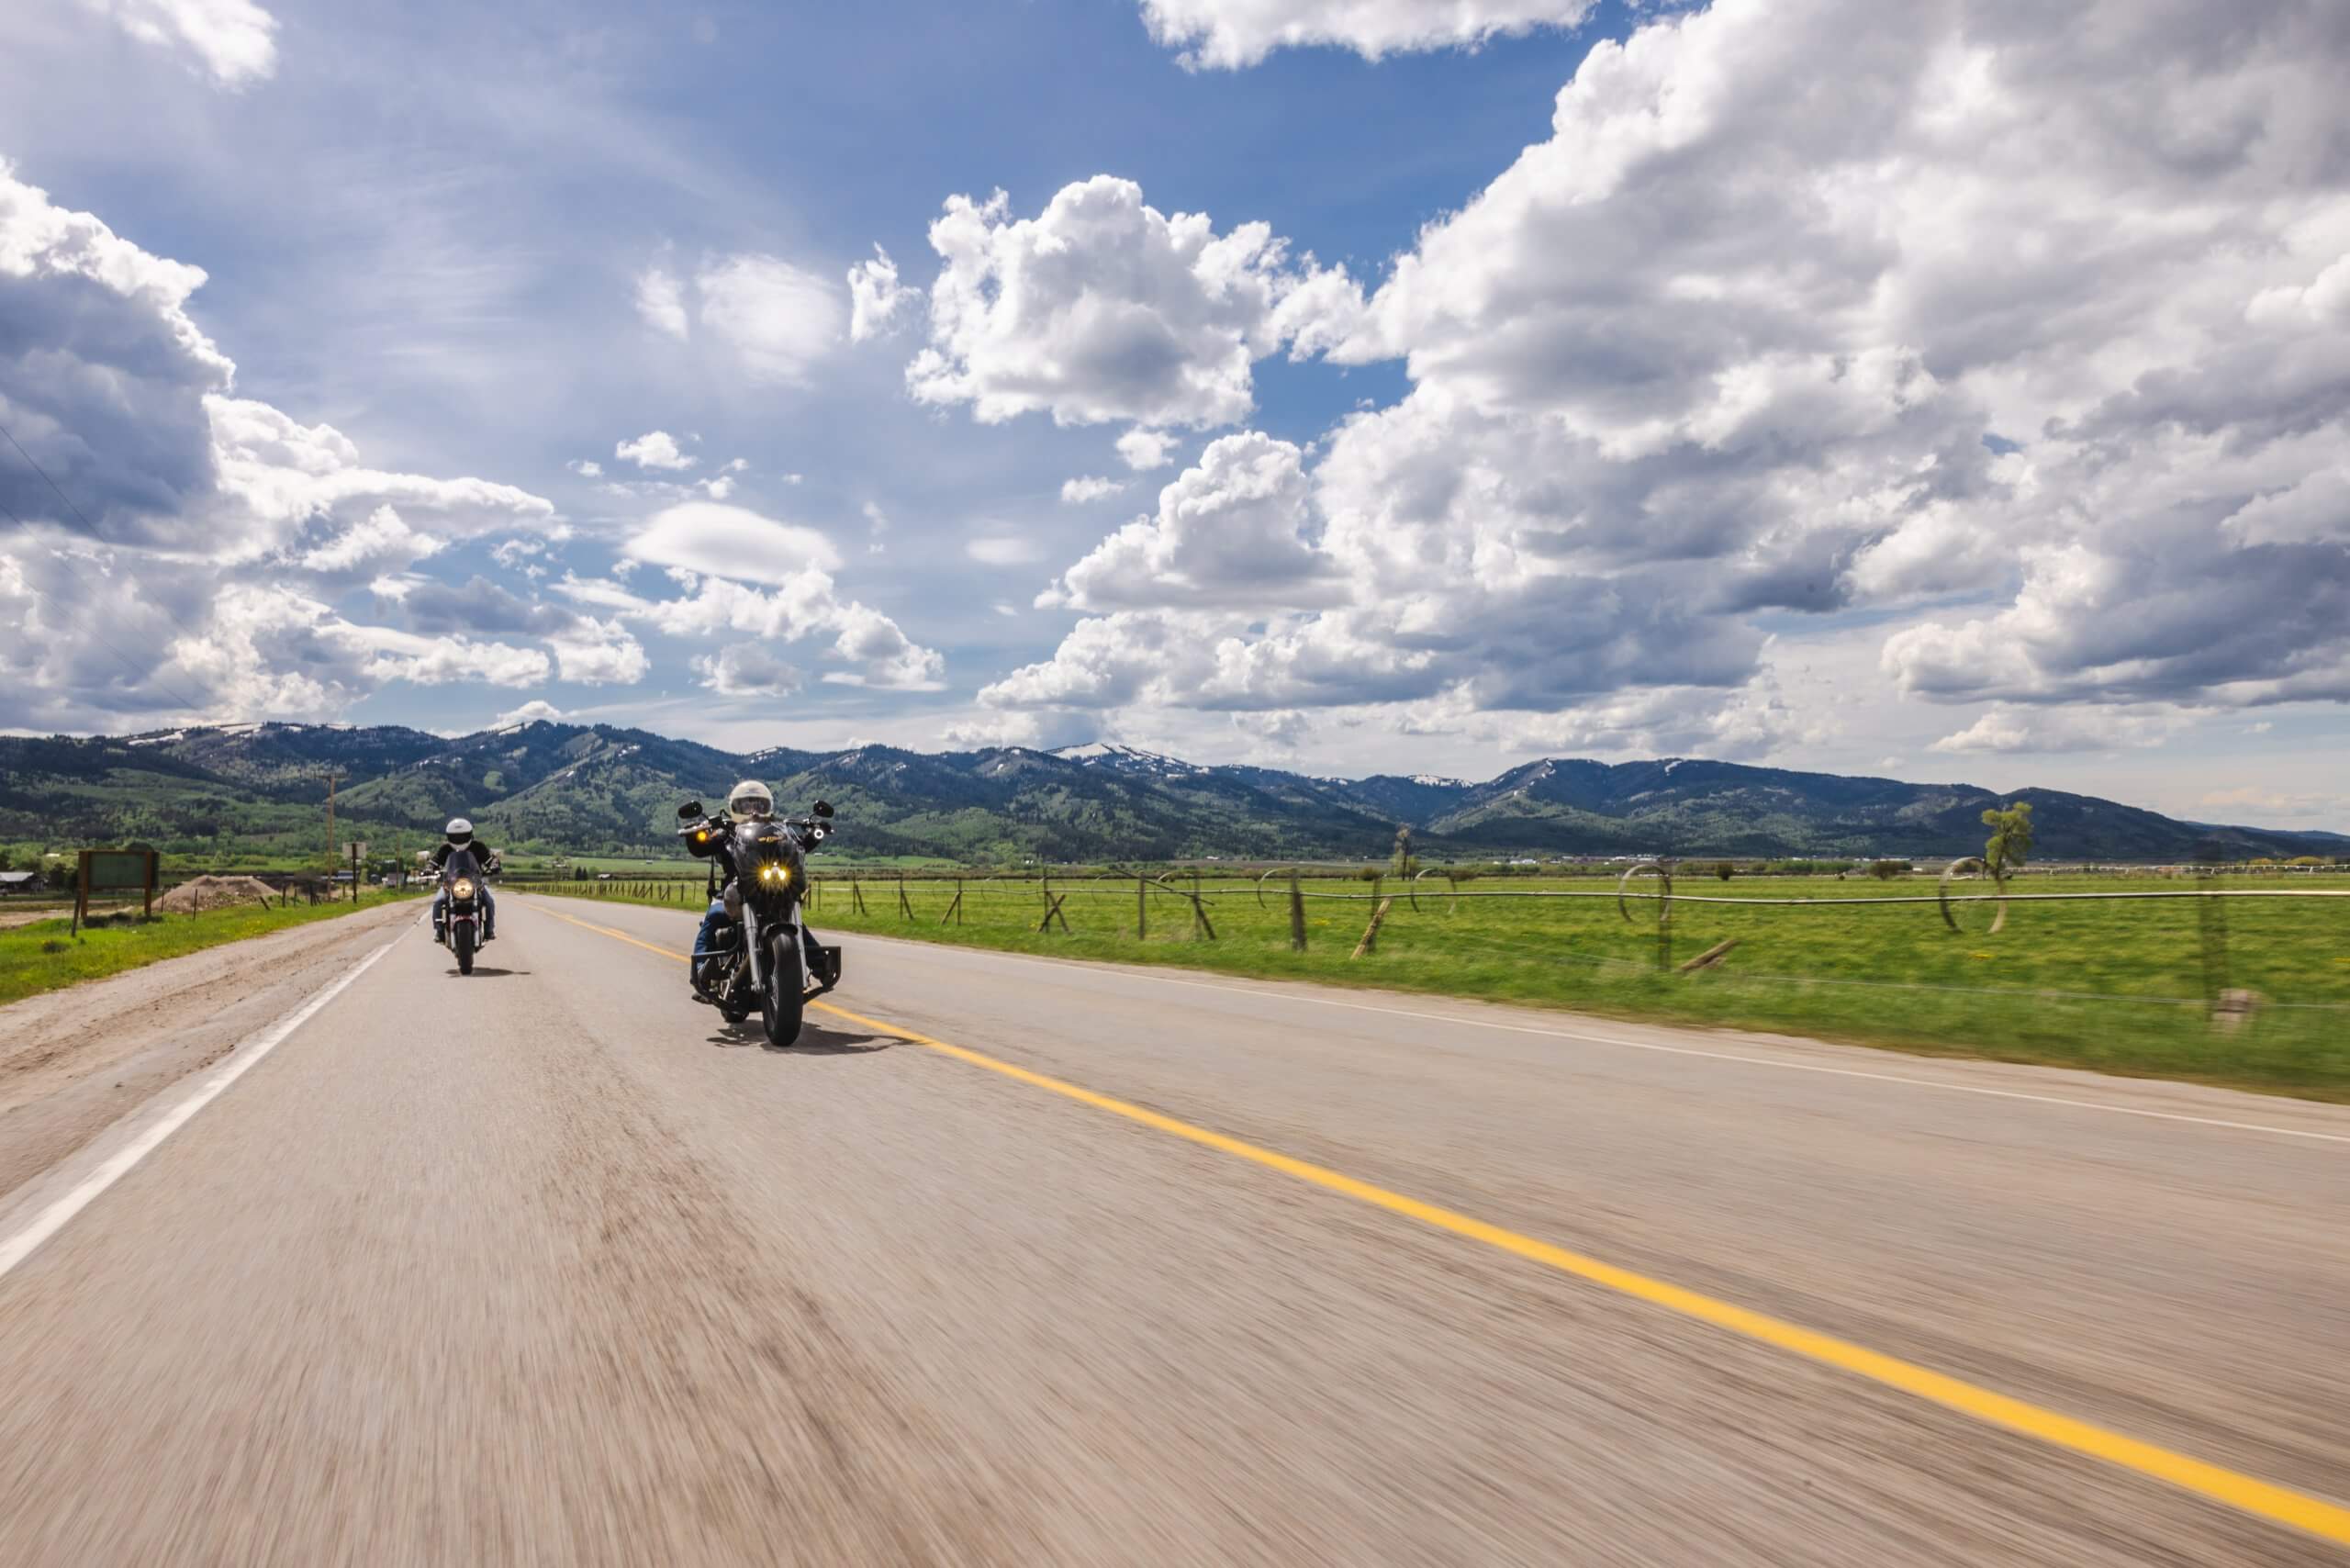 Motorcyclists riding down a mountain highway